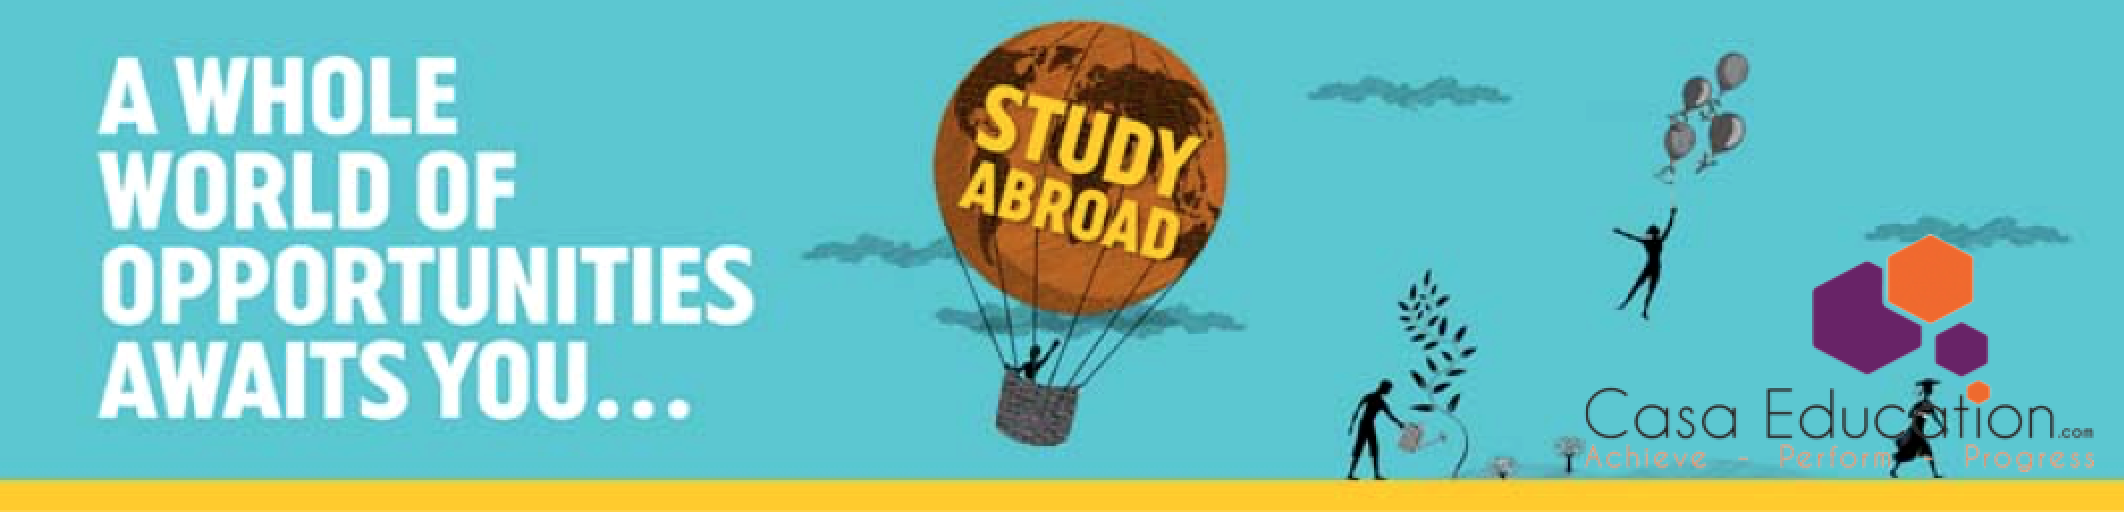 banner-study-abroad-CasaEducation